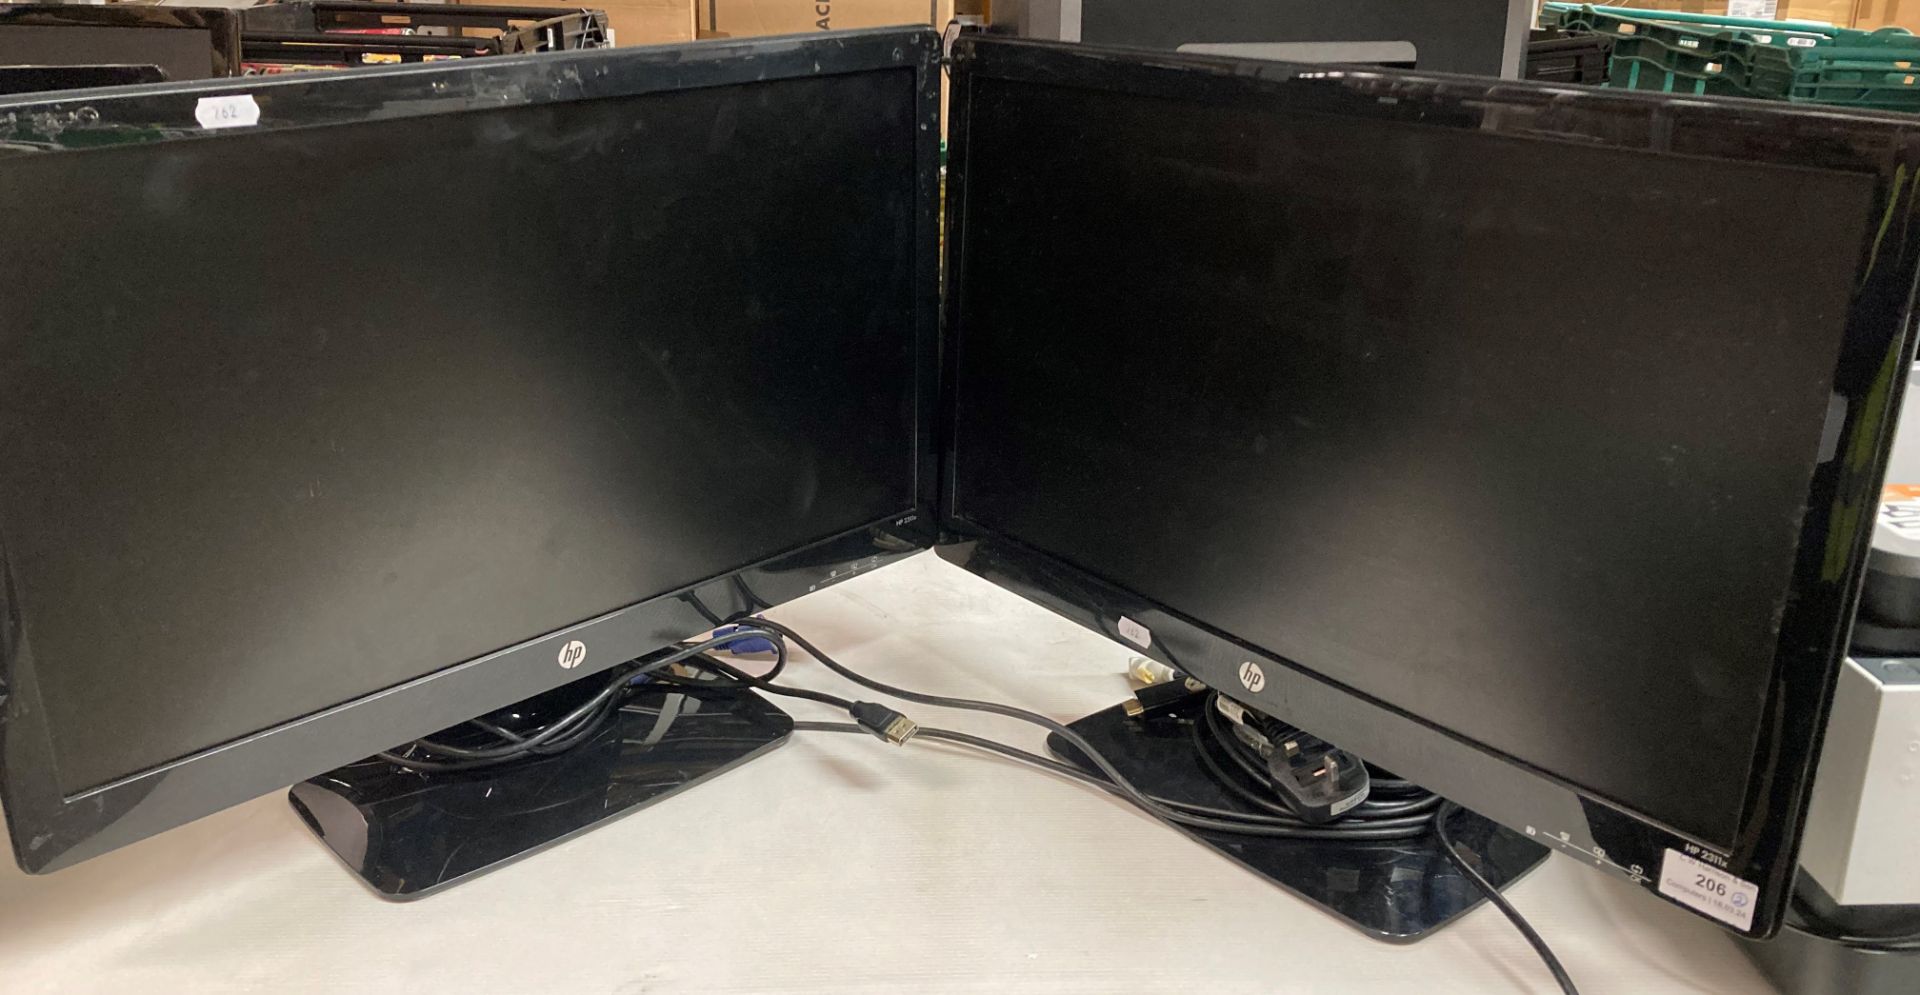 2 x 23" HP 2311x computer monitors with power leads (saleroom location: G11)